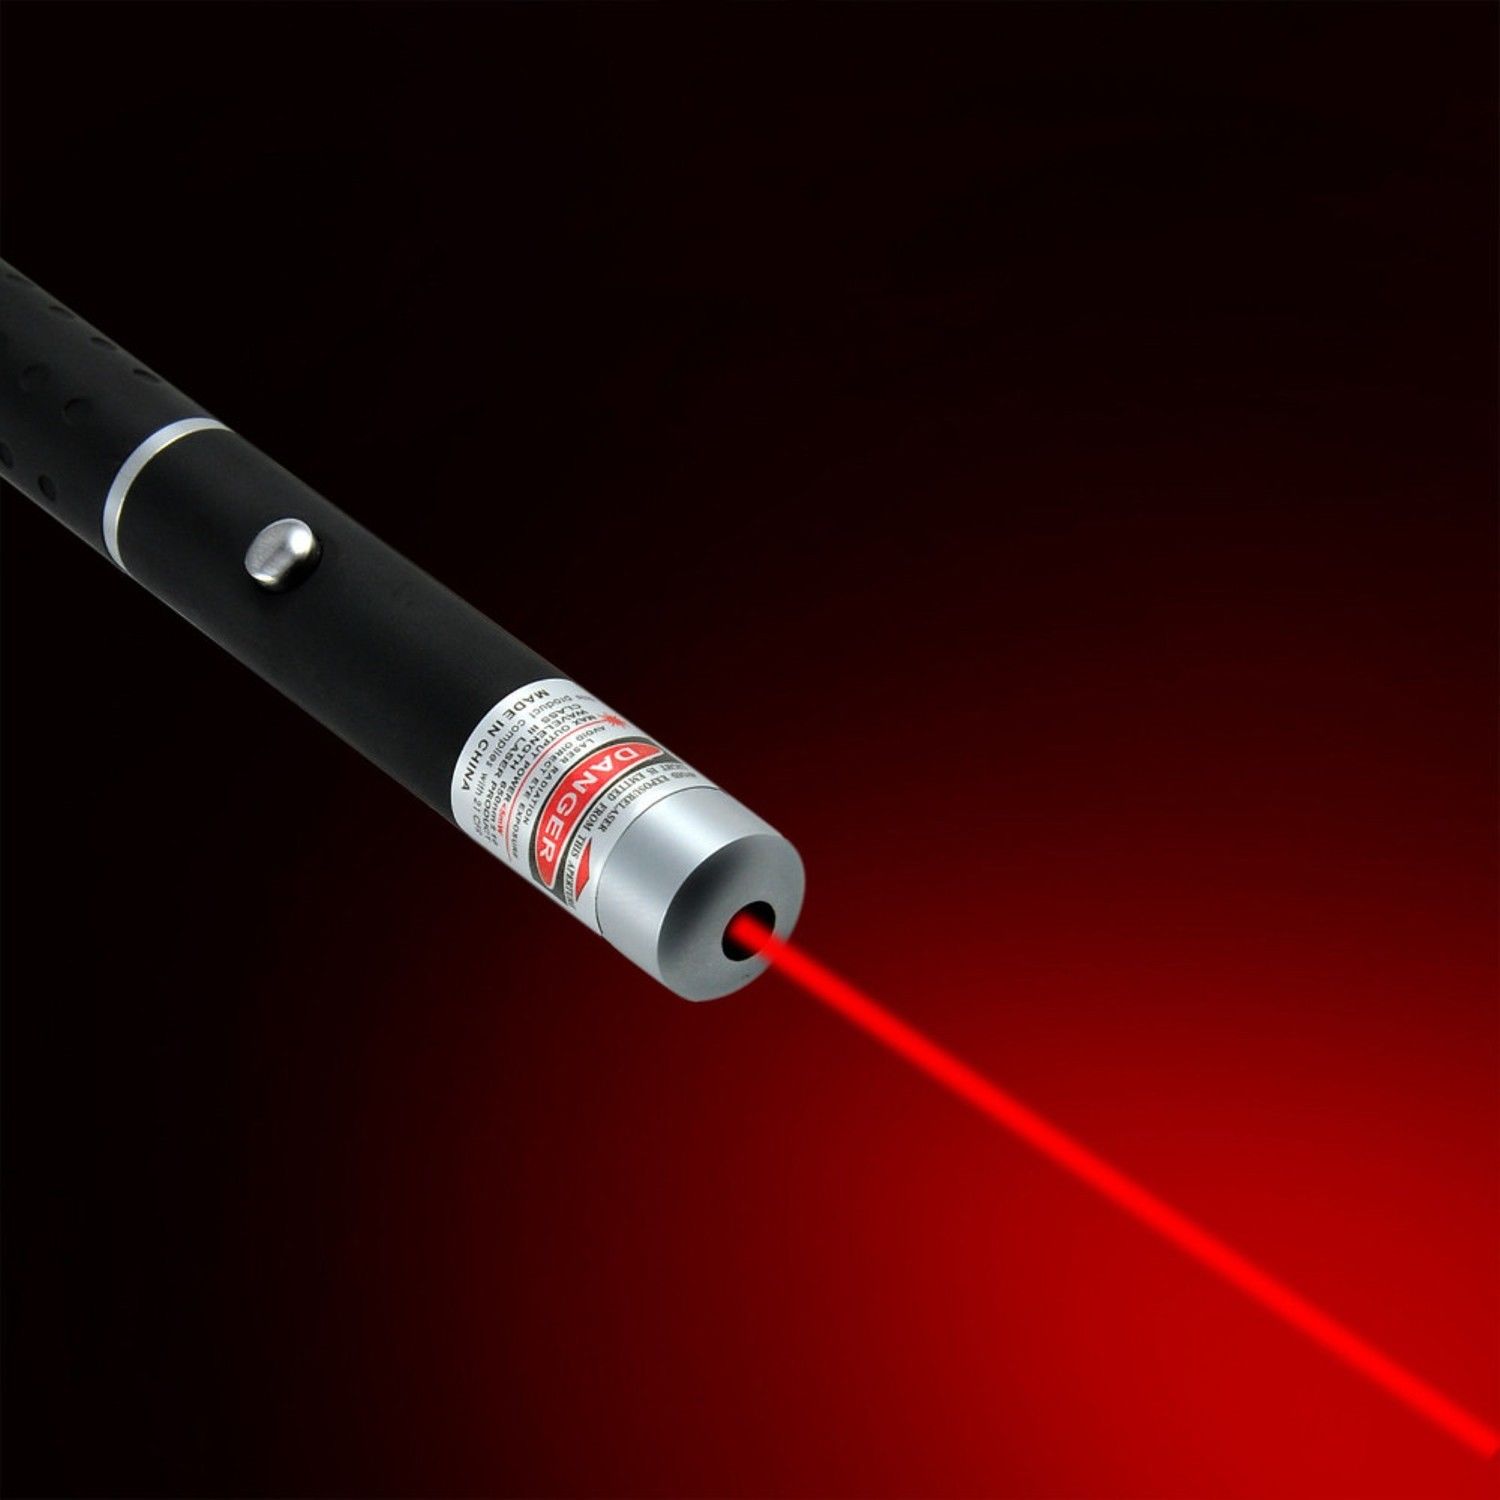 

Astronomy Military High Power 5mW 650nm RED Beam Laser Pointer Pen Powerful lazer Pet laser pointe